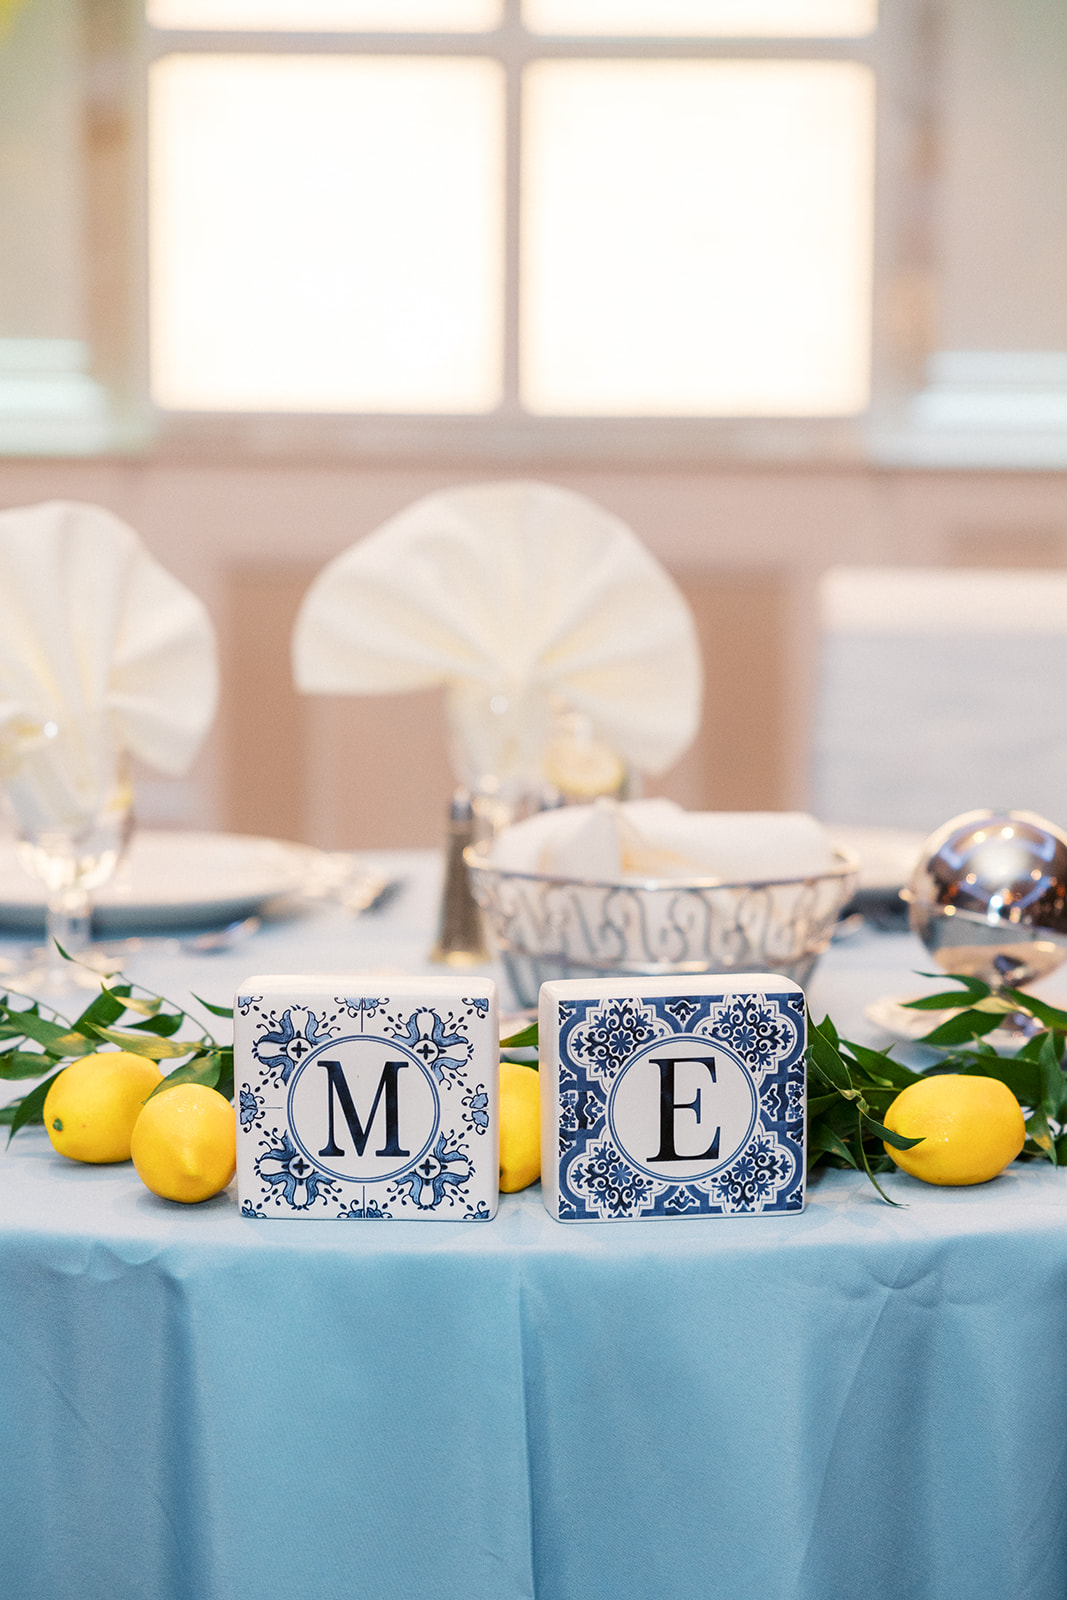 Details of custom letters at the newlyweds table for a wedding reception